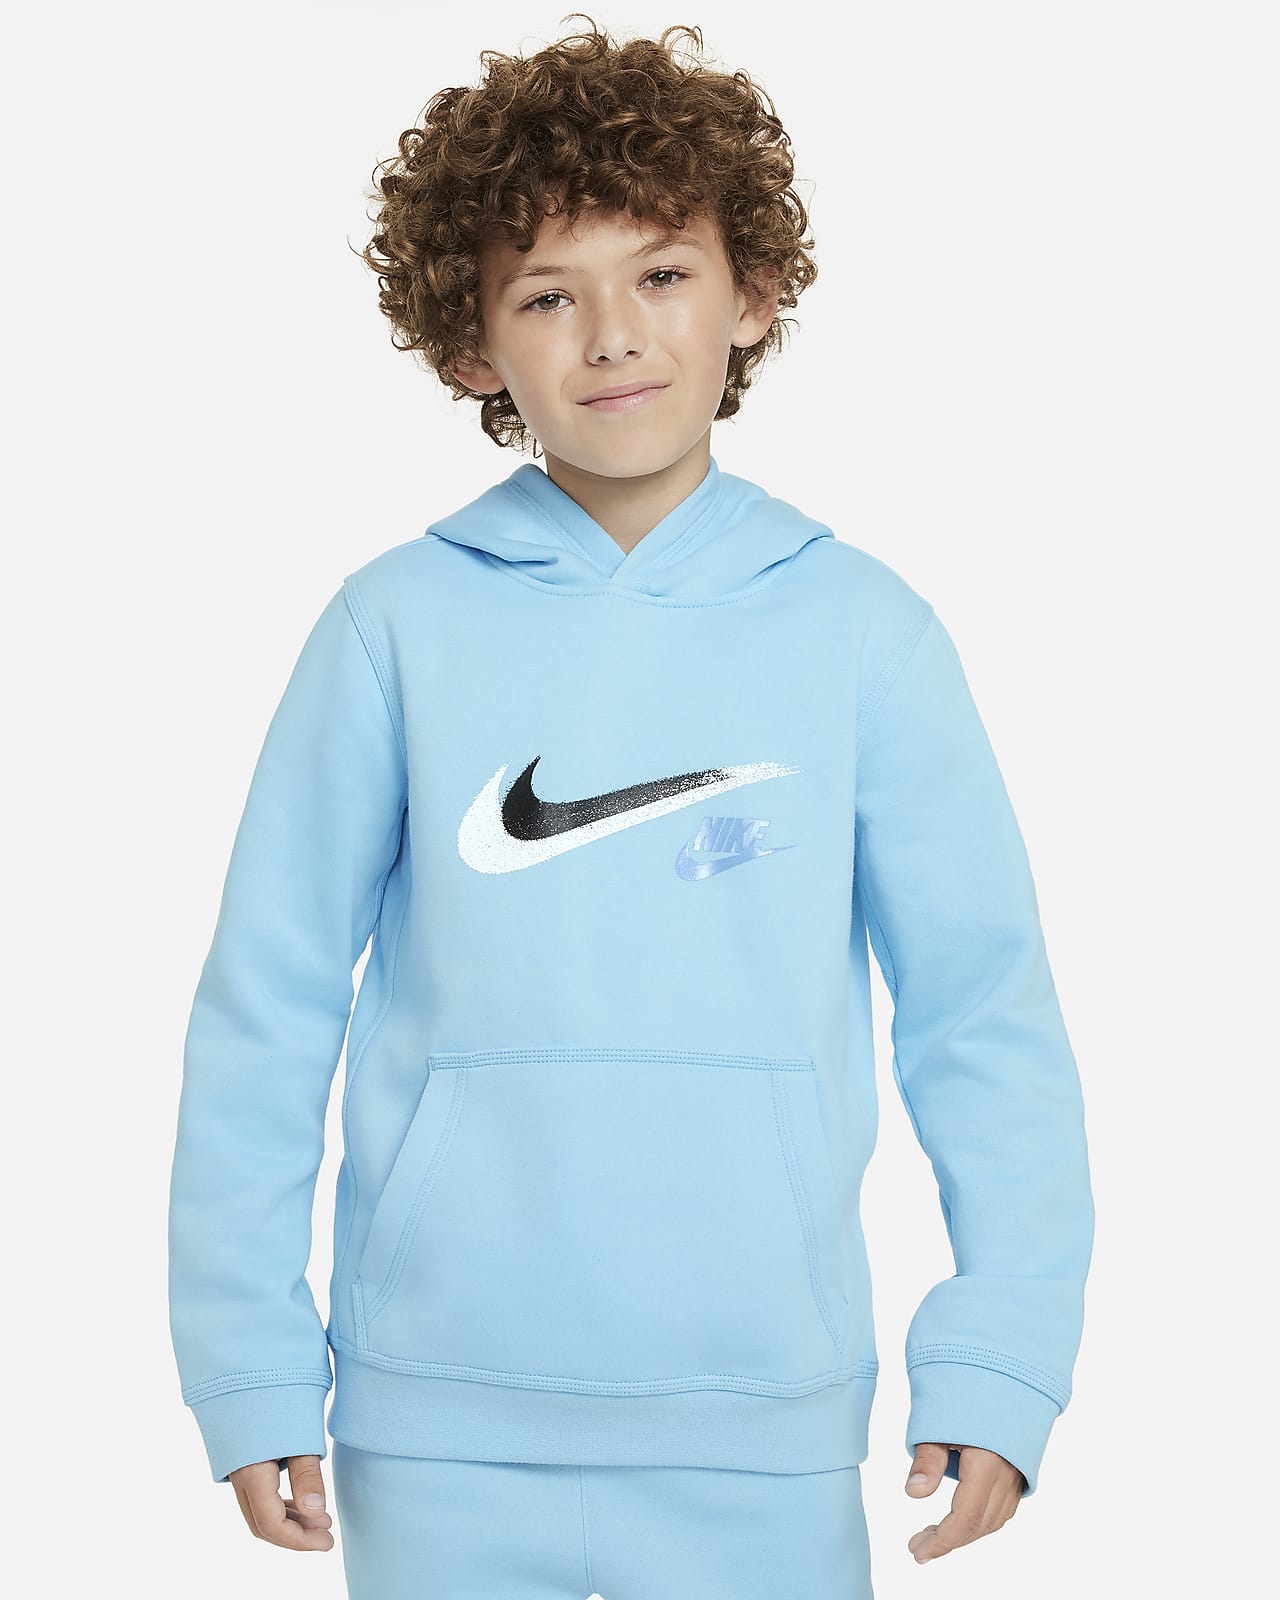 https://static.nike.com/a/images/t_PDP_1280_v1/f_auto,q_auto:eco/889a19ea-d674-45fb-9dbd-30019faf7bd7/sportswear-older-fleece-pullover-graphic-hoodie-nq7cnf.png